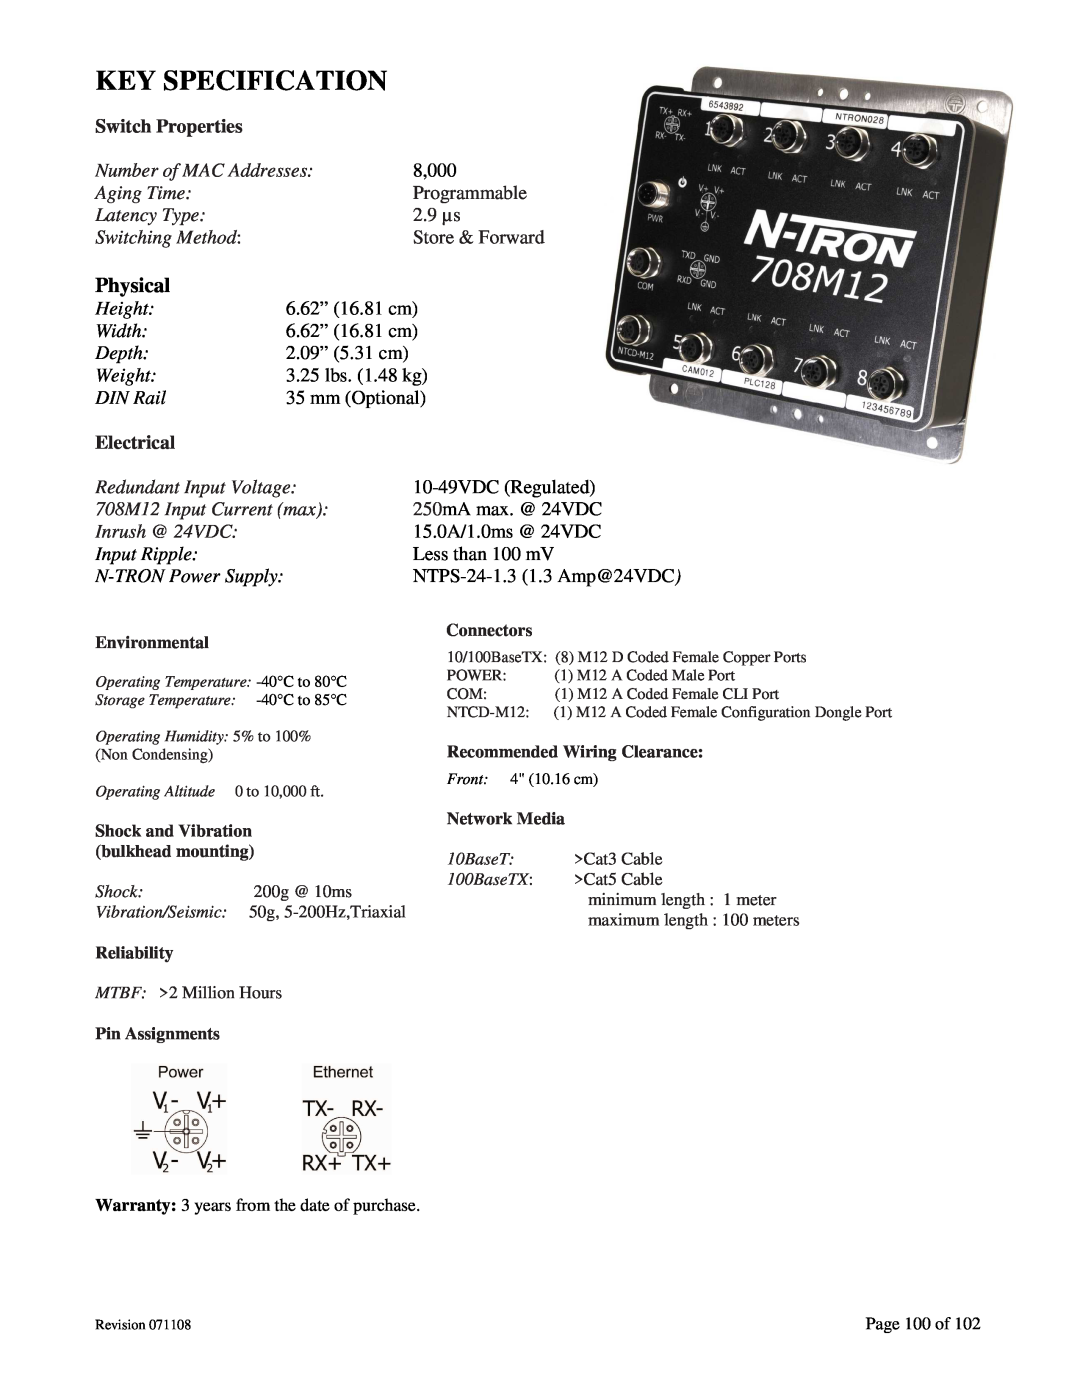 N-Tron 708M12 user manual Key Specification, Physical, Switch Properties, Electrical 